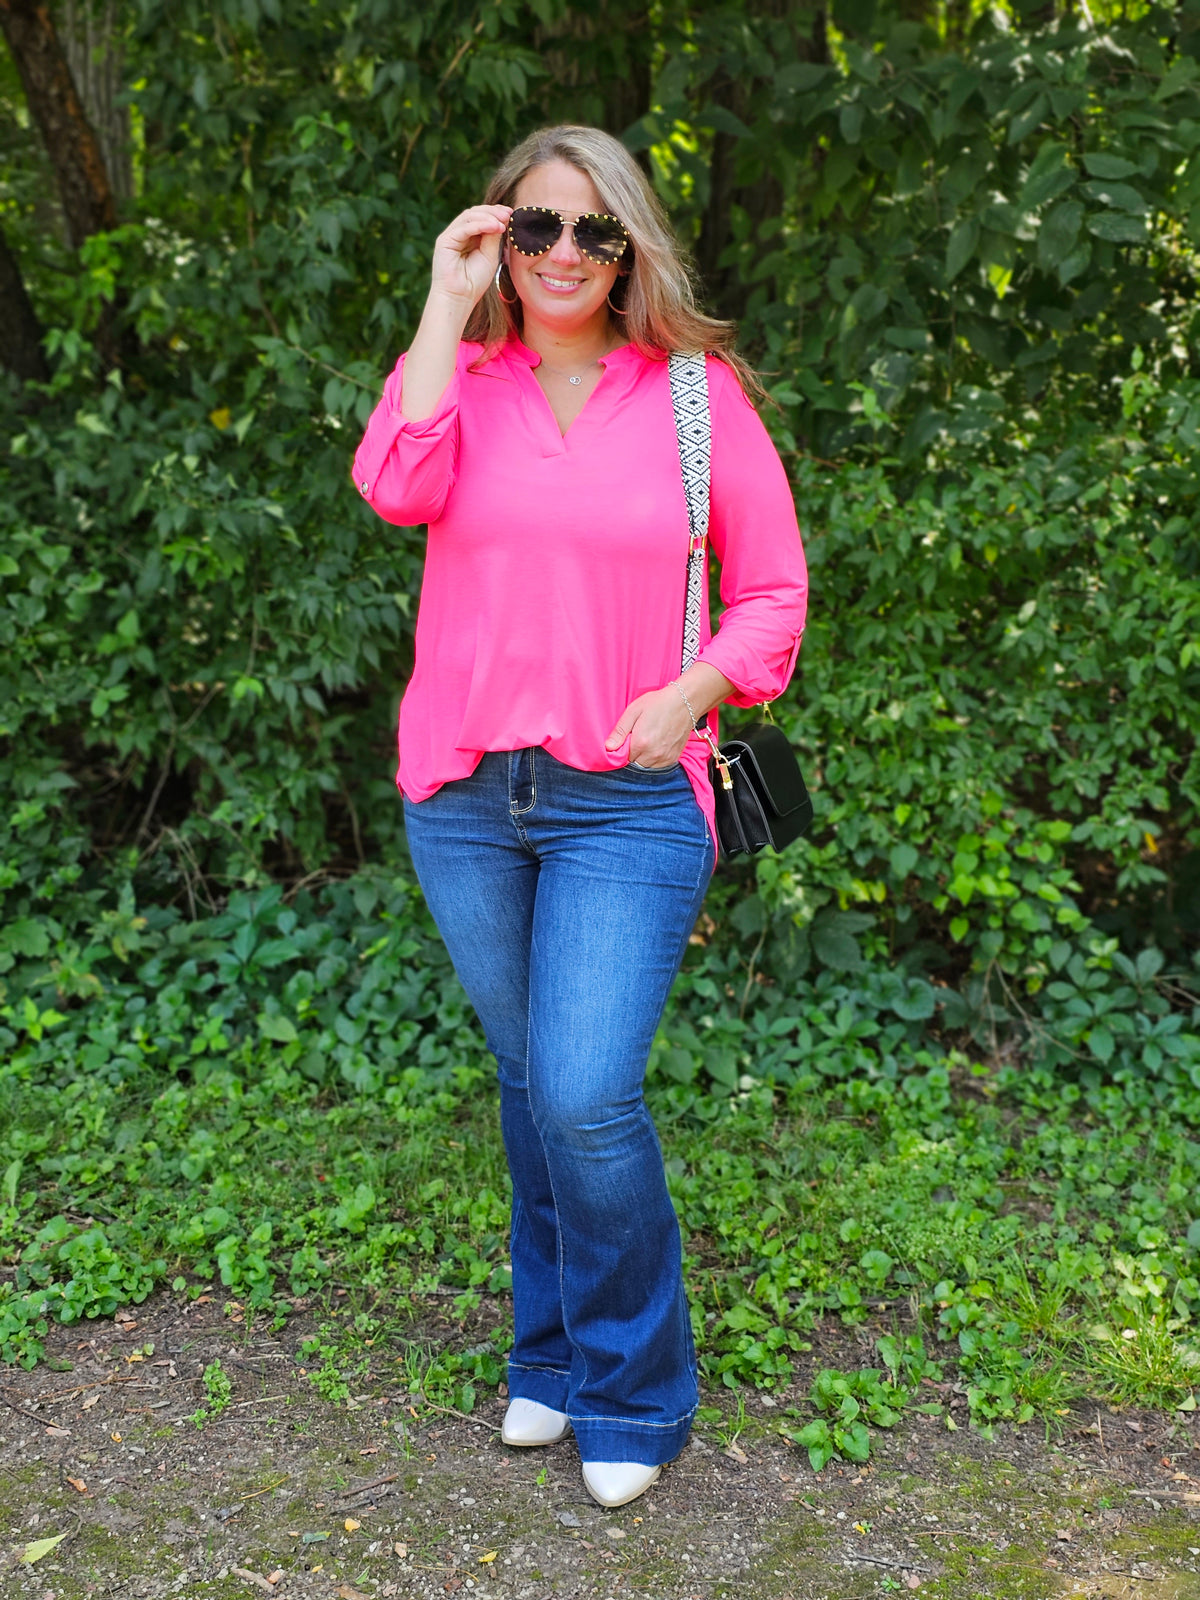 HOT PINK LIZZY 3/4 SLEEVE TOP